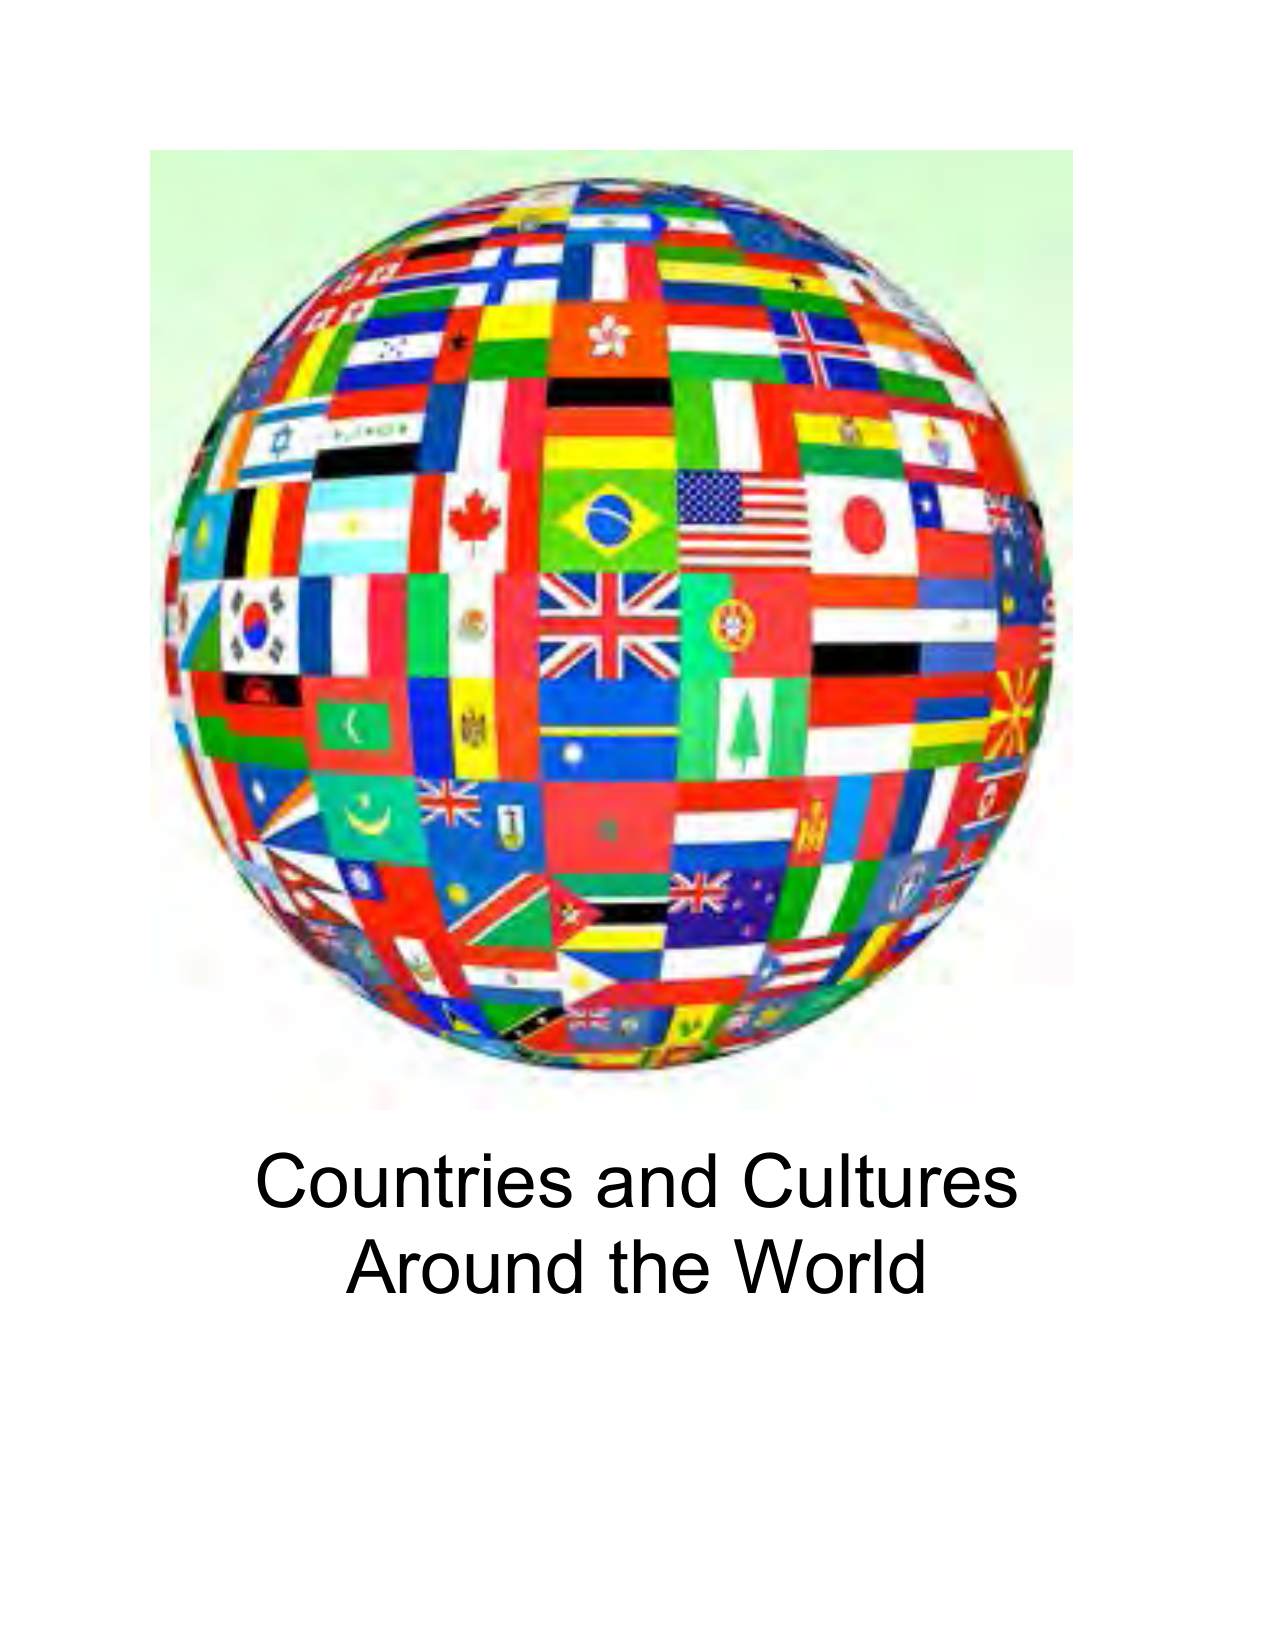 Cultures around. Different Cultures around the World book.